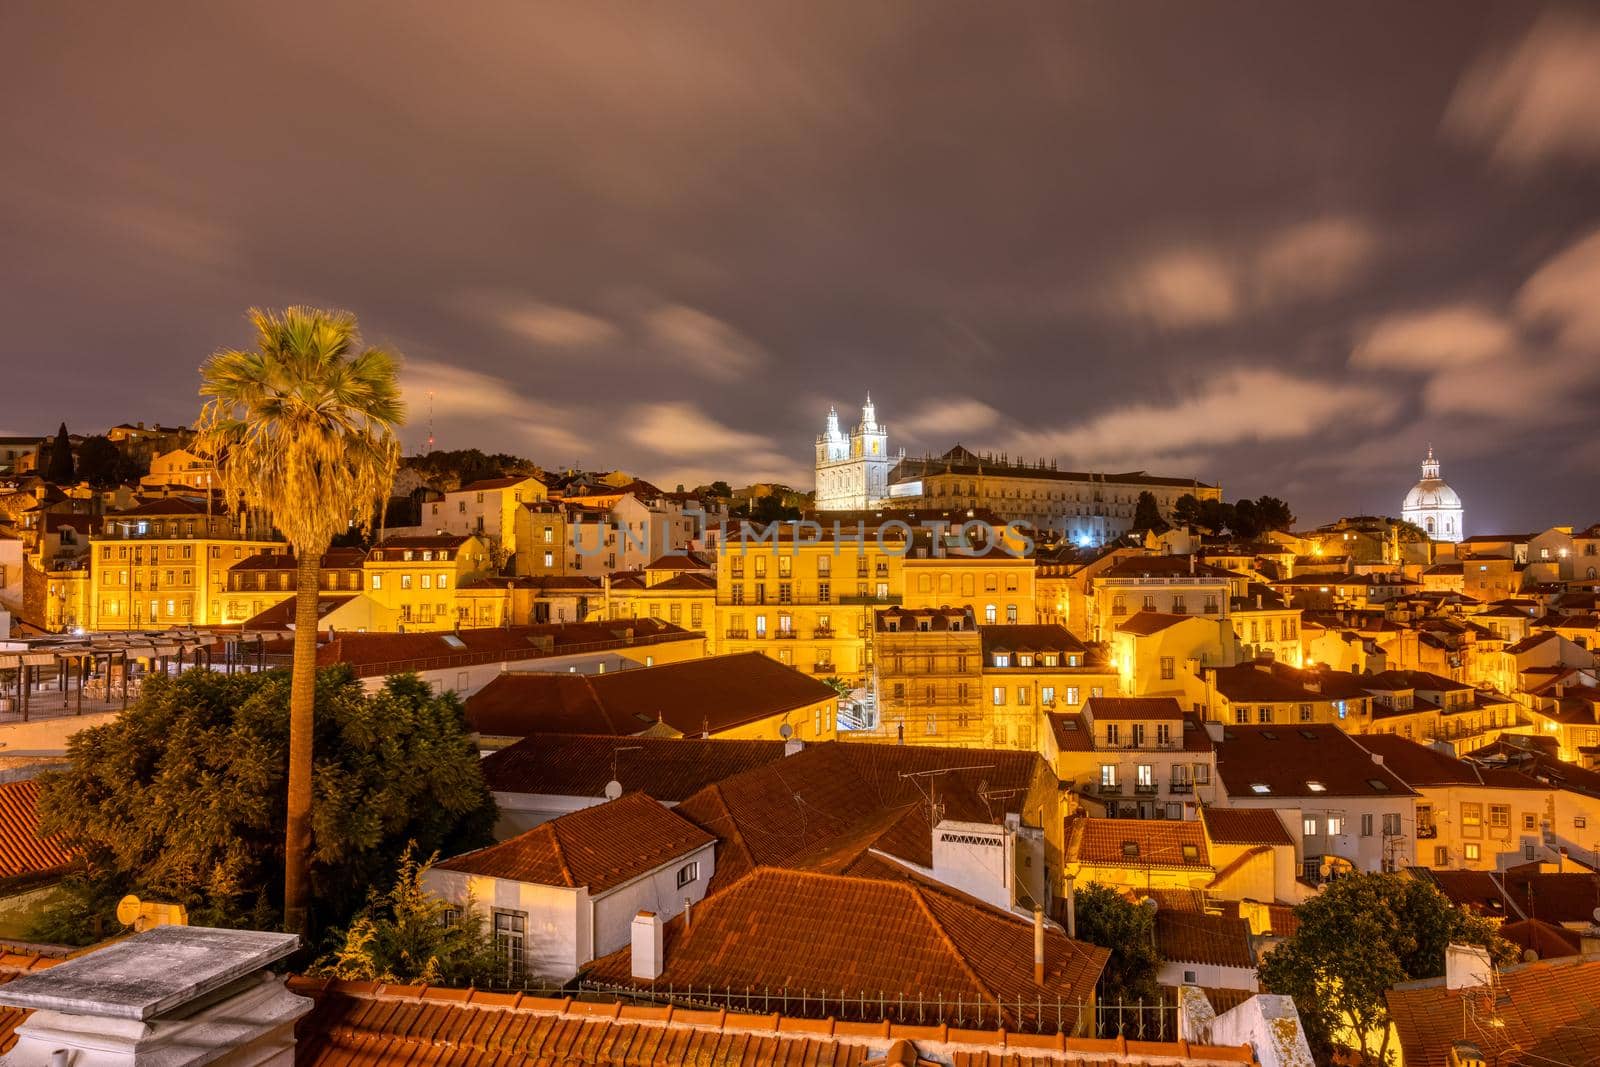 View of the old Alfama district in Lisbon, Portugal, at night